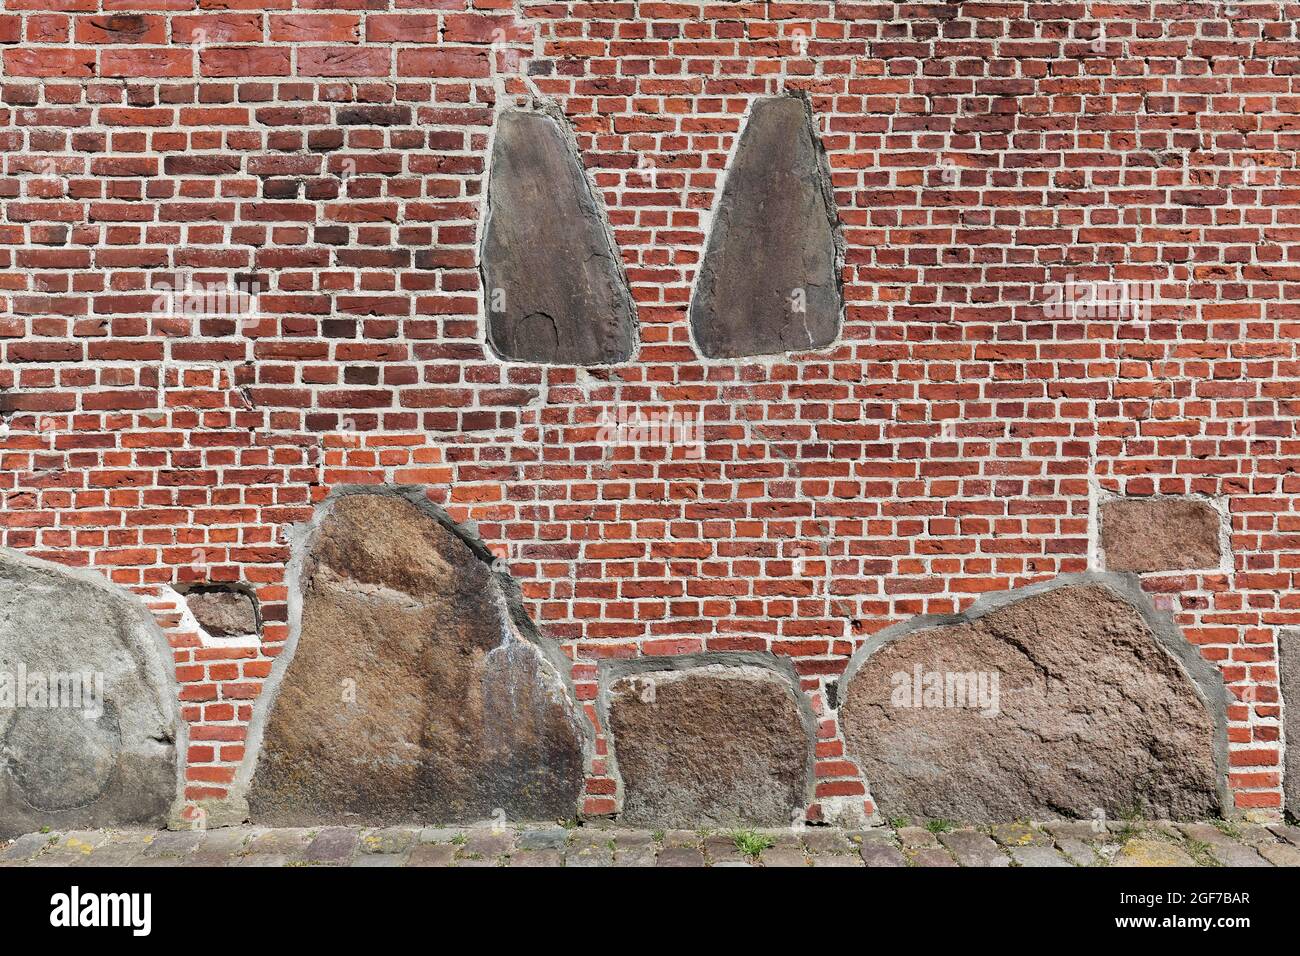 St. Severin, brick wall with walled-in gravestones, Keitum on Sylt, East Frisian Islands, Schleswig-Holstein, Germany Stock Photo